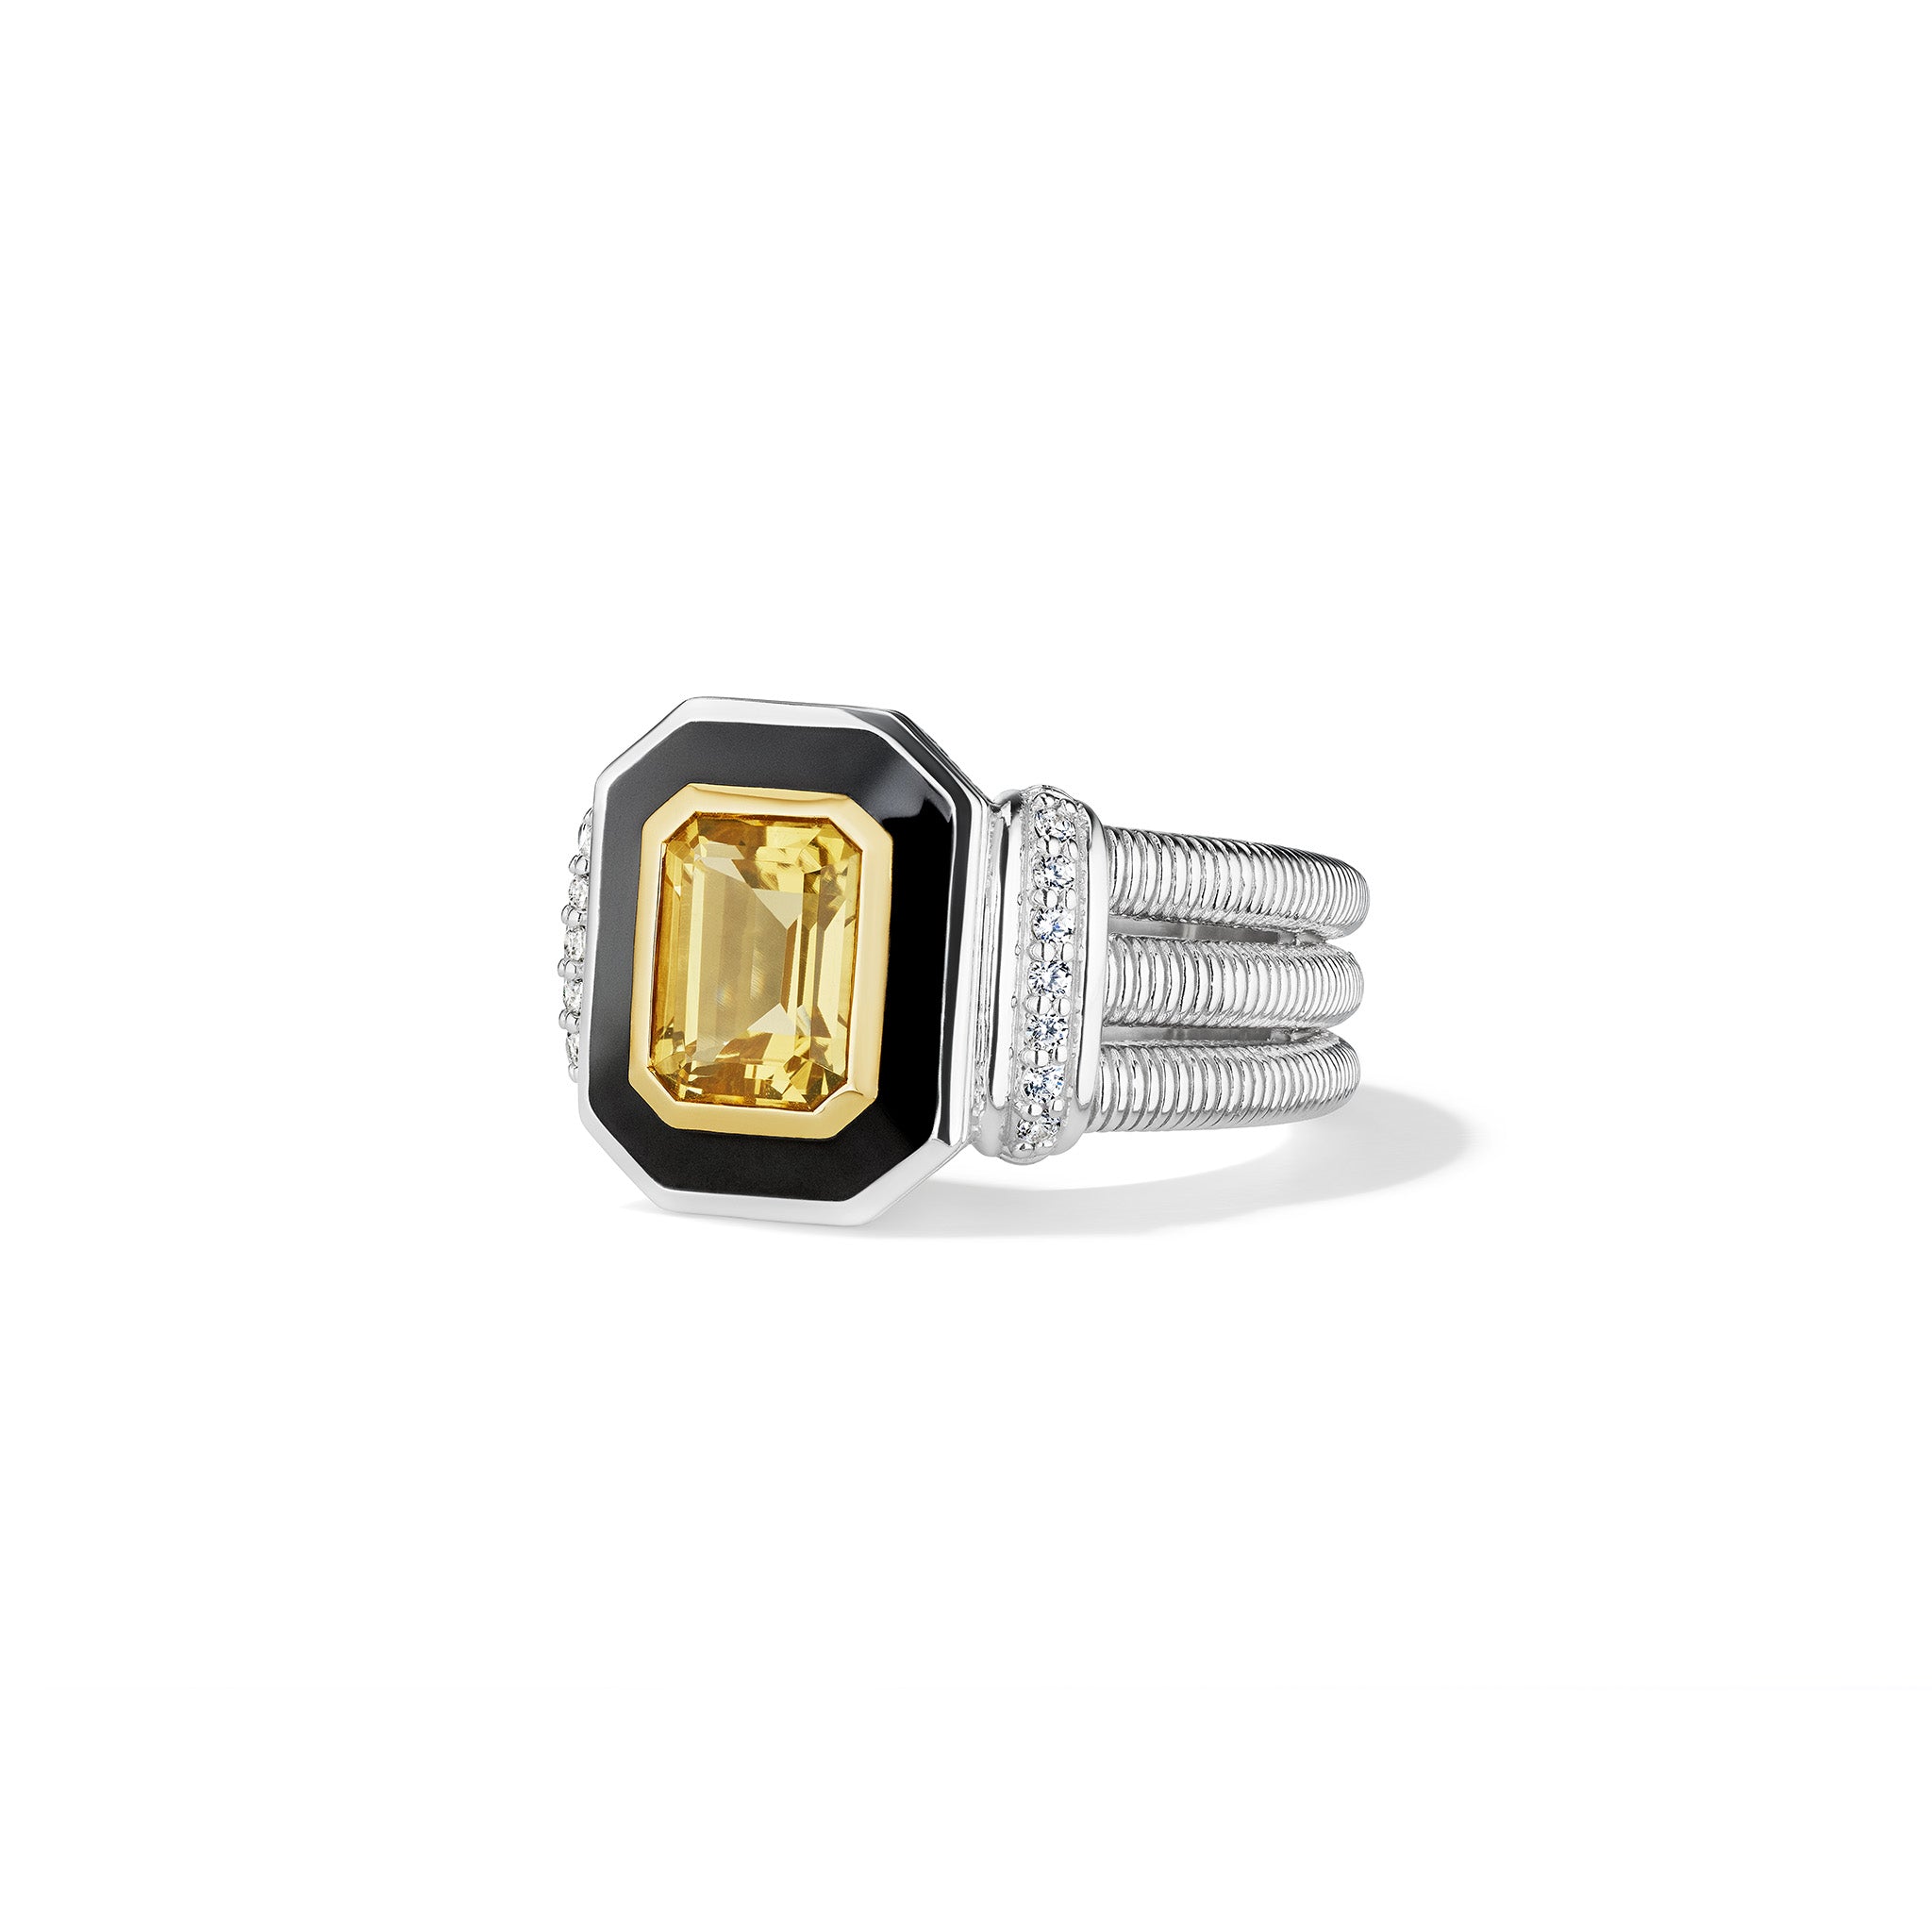 Adrienne Ring with Enamel, Champagne Citrine, Diamonds and 18K Gold